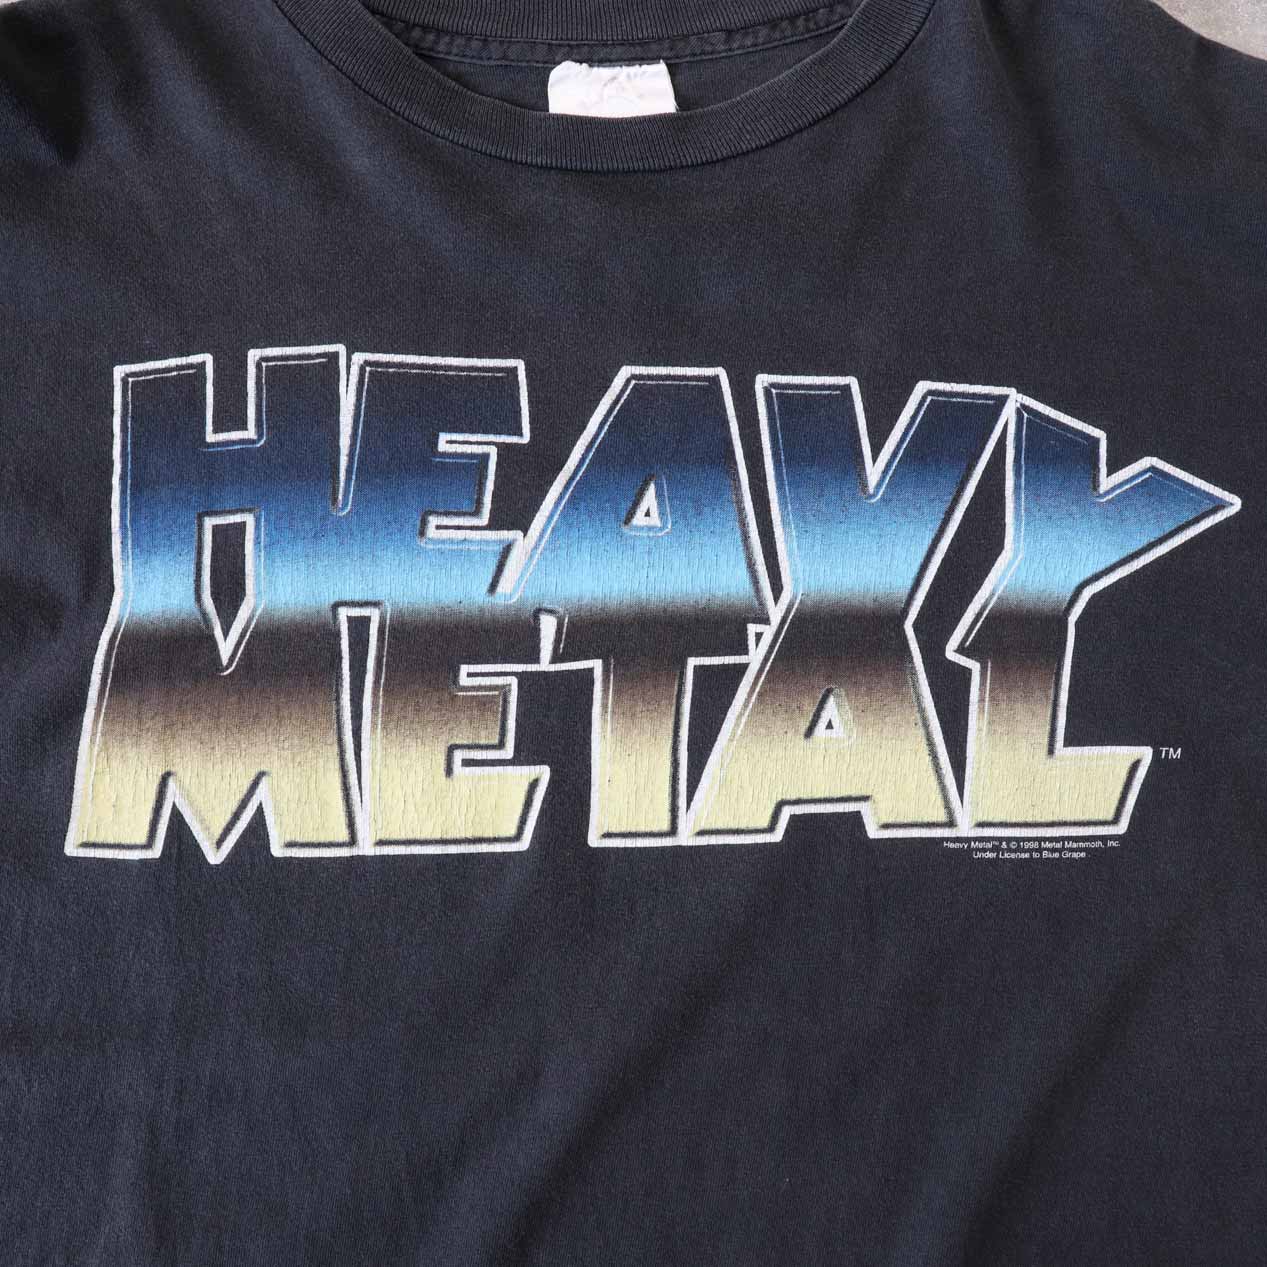 POST JUNK / 90's HEAVY METAL MAGAZINE T-Shirt Made In U.S.A. ...